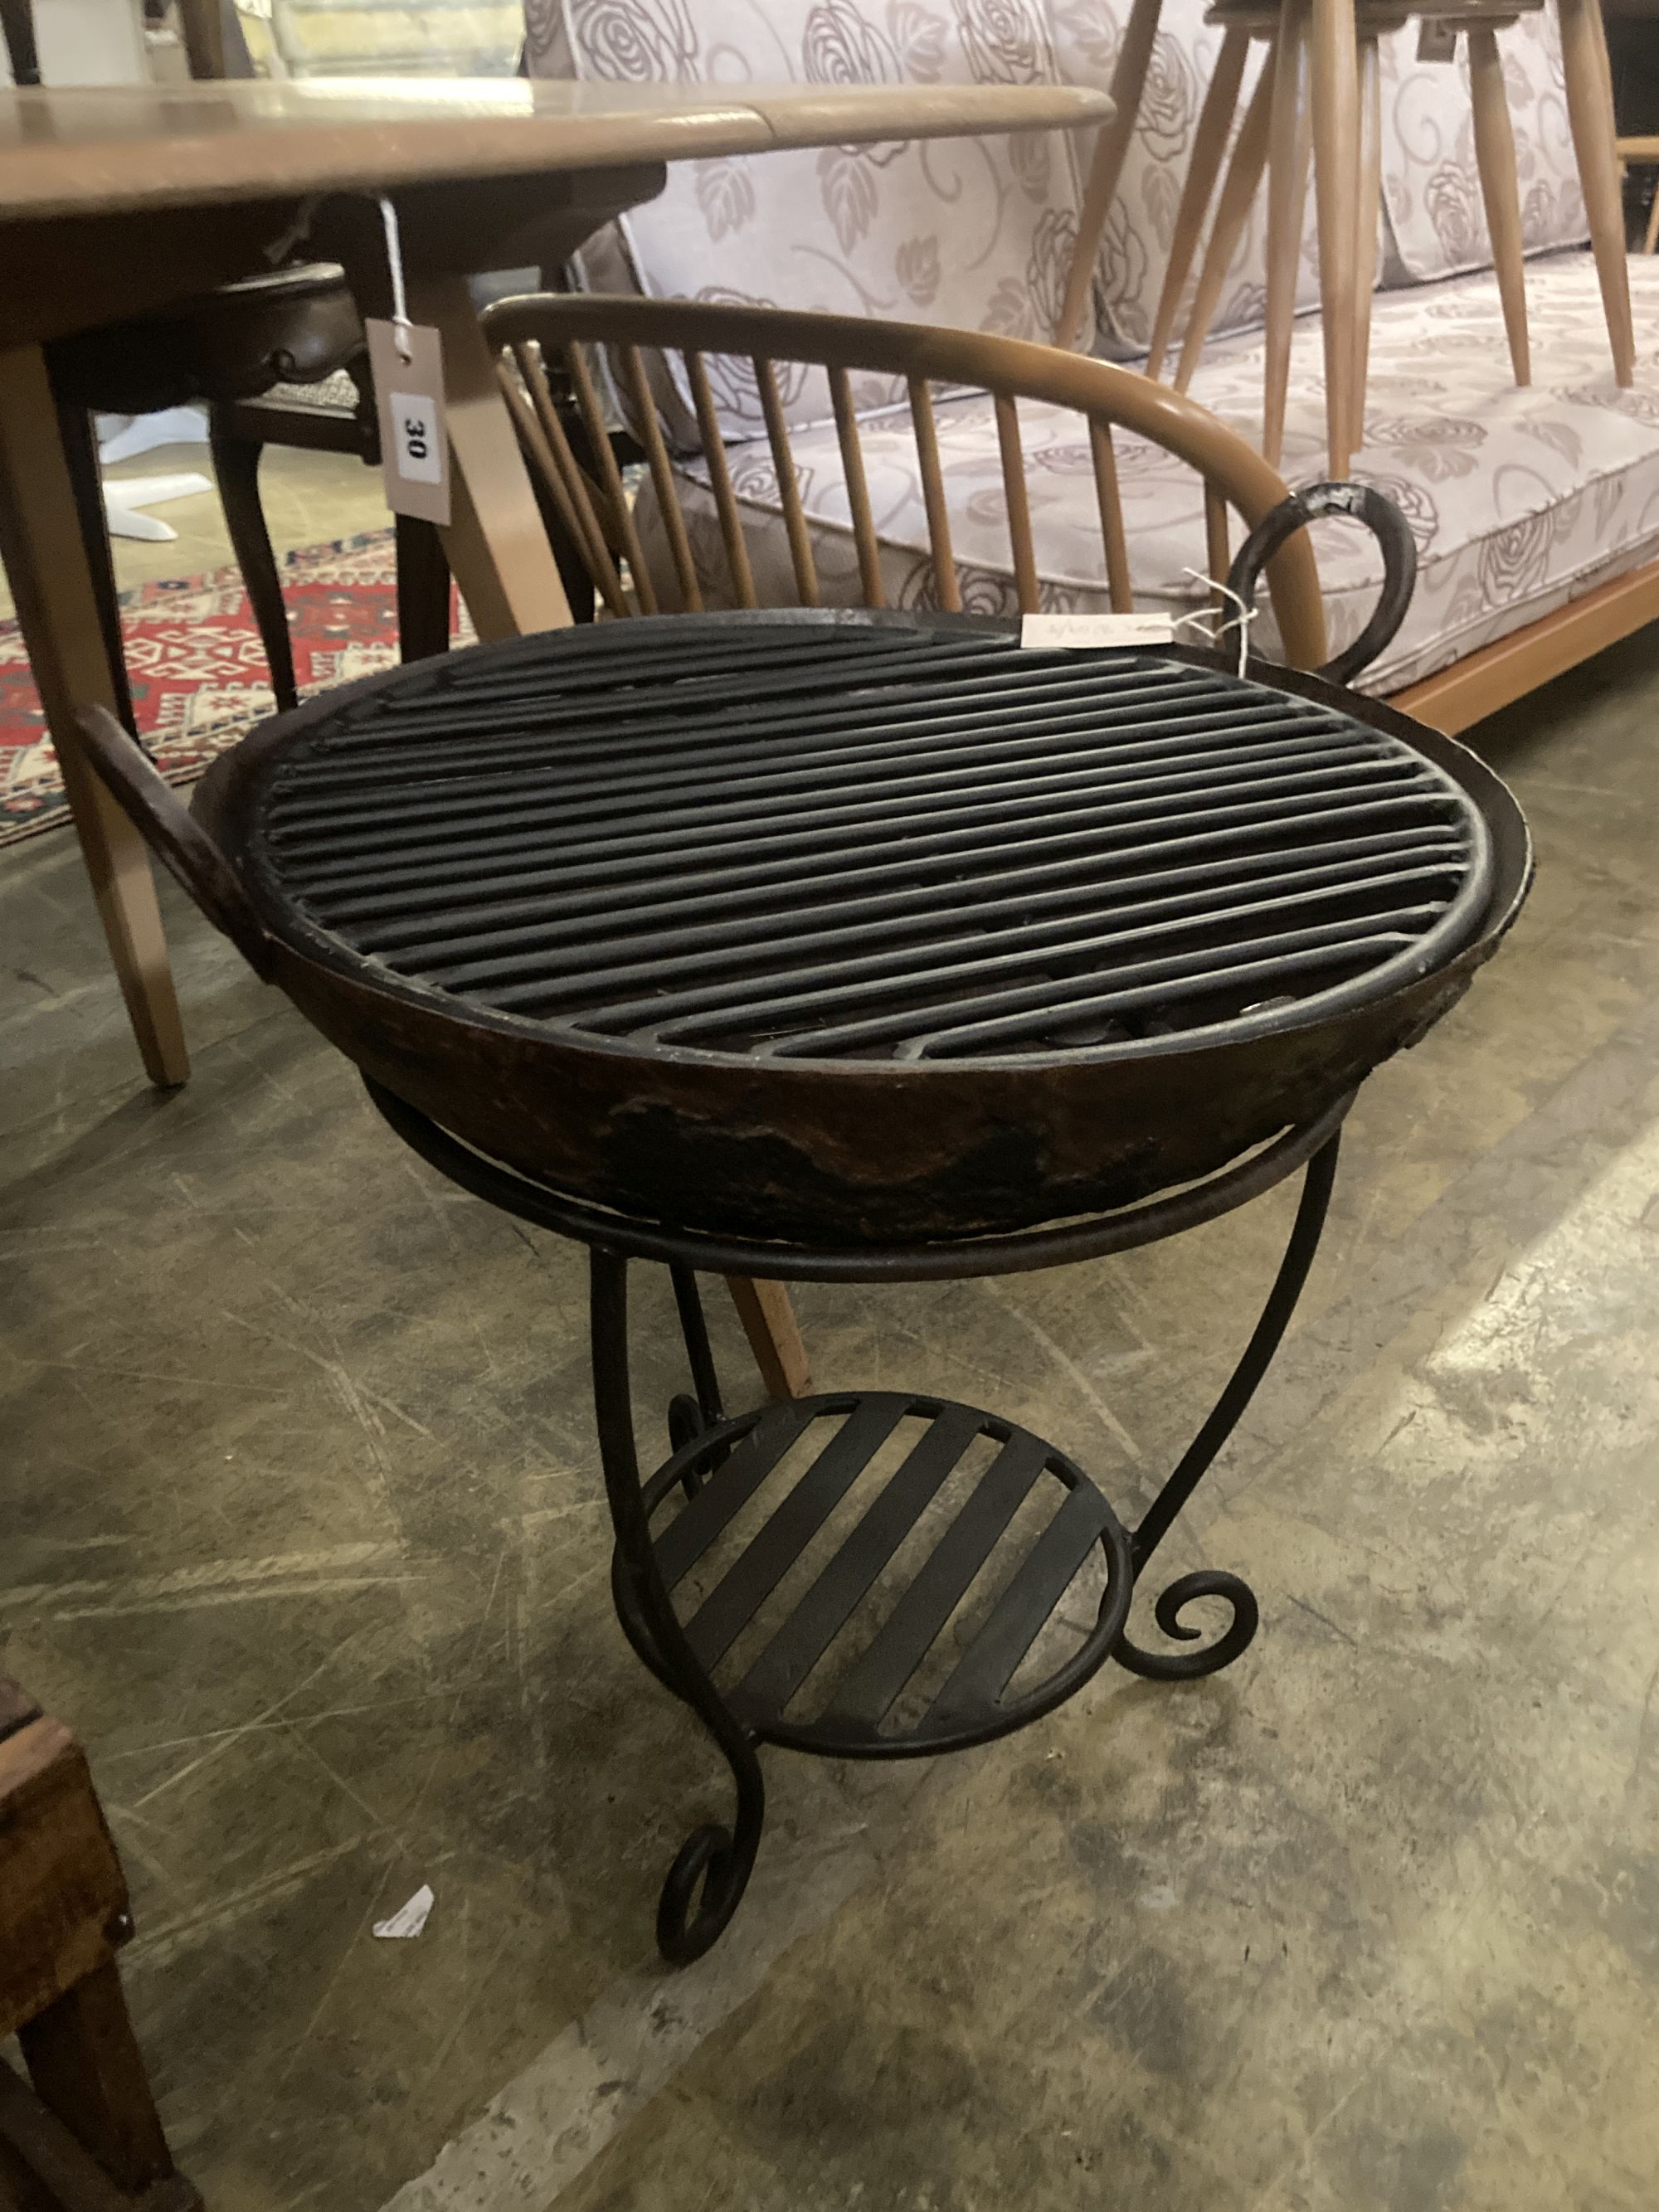 A fire pit with grill and stand, diameter 50cm height 52cm